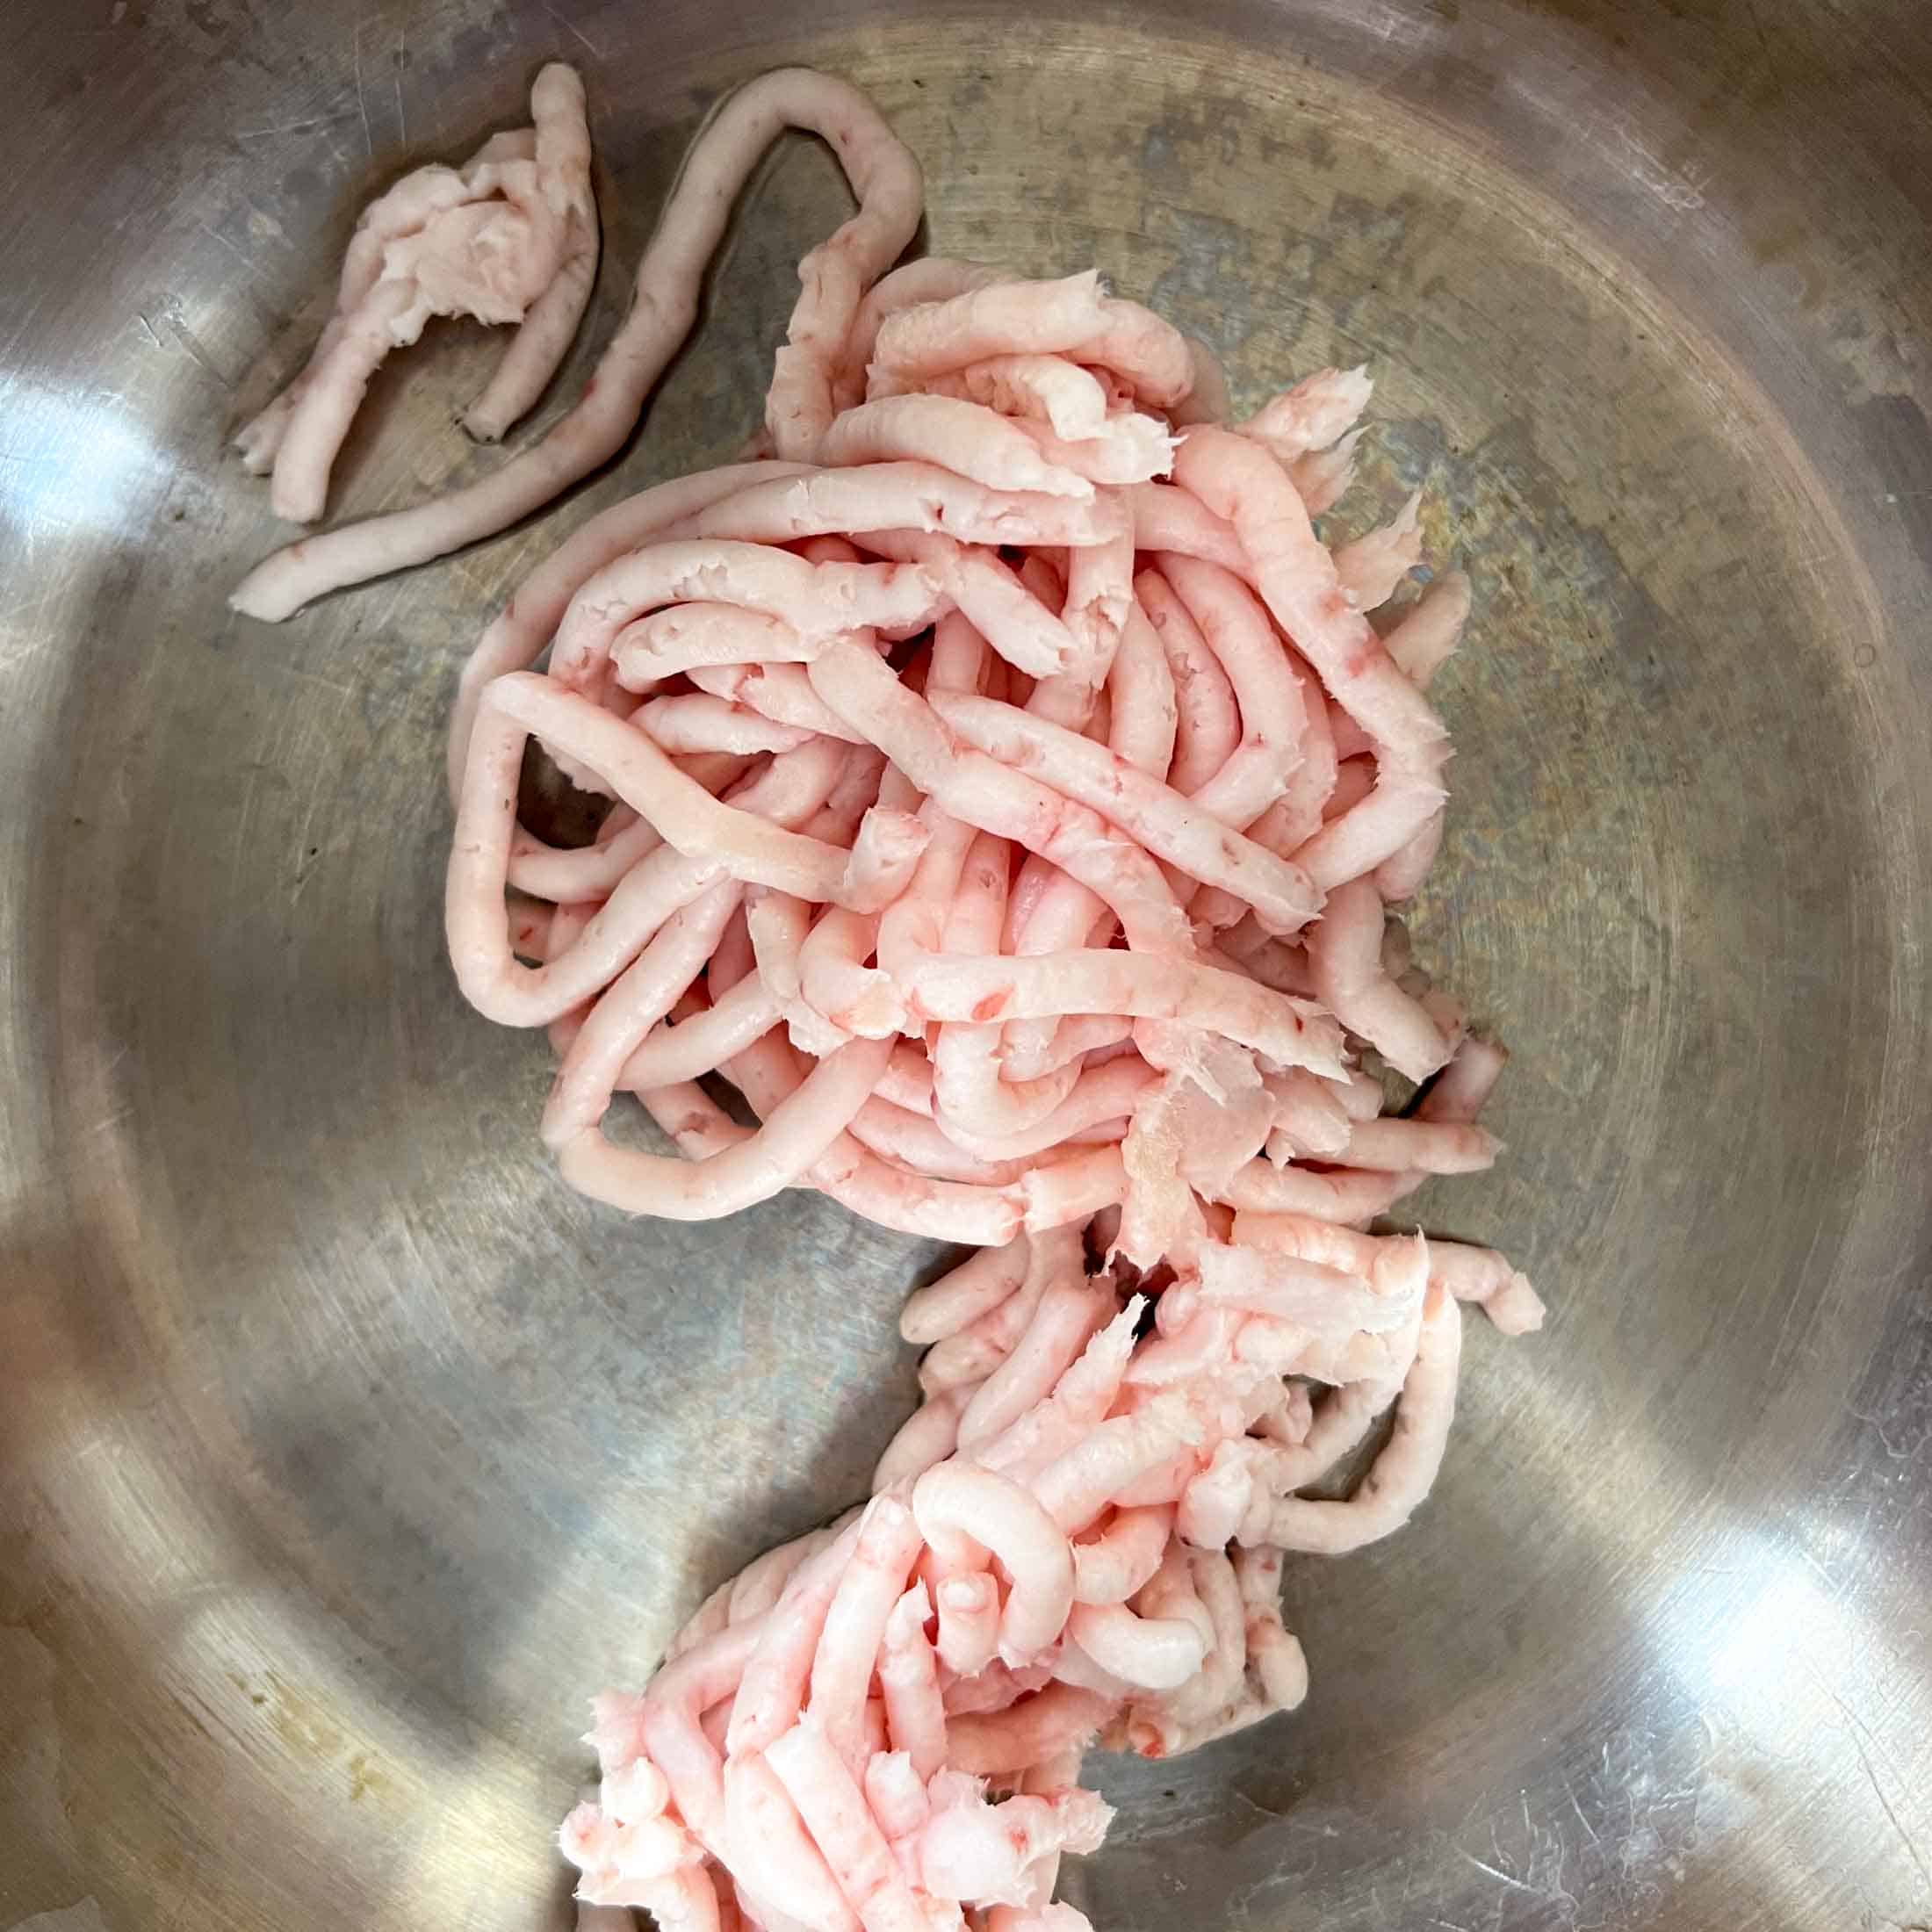 Ground strings of lard sitting at the bottom of a heavy stock pot.